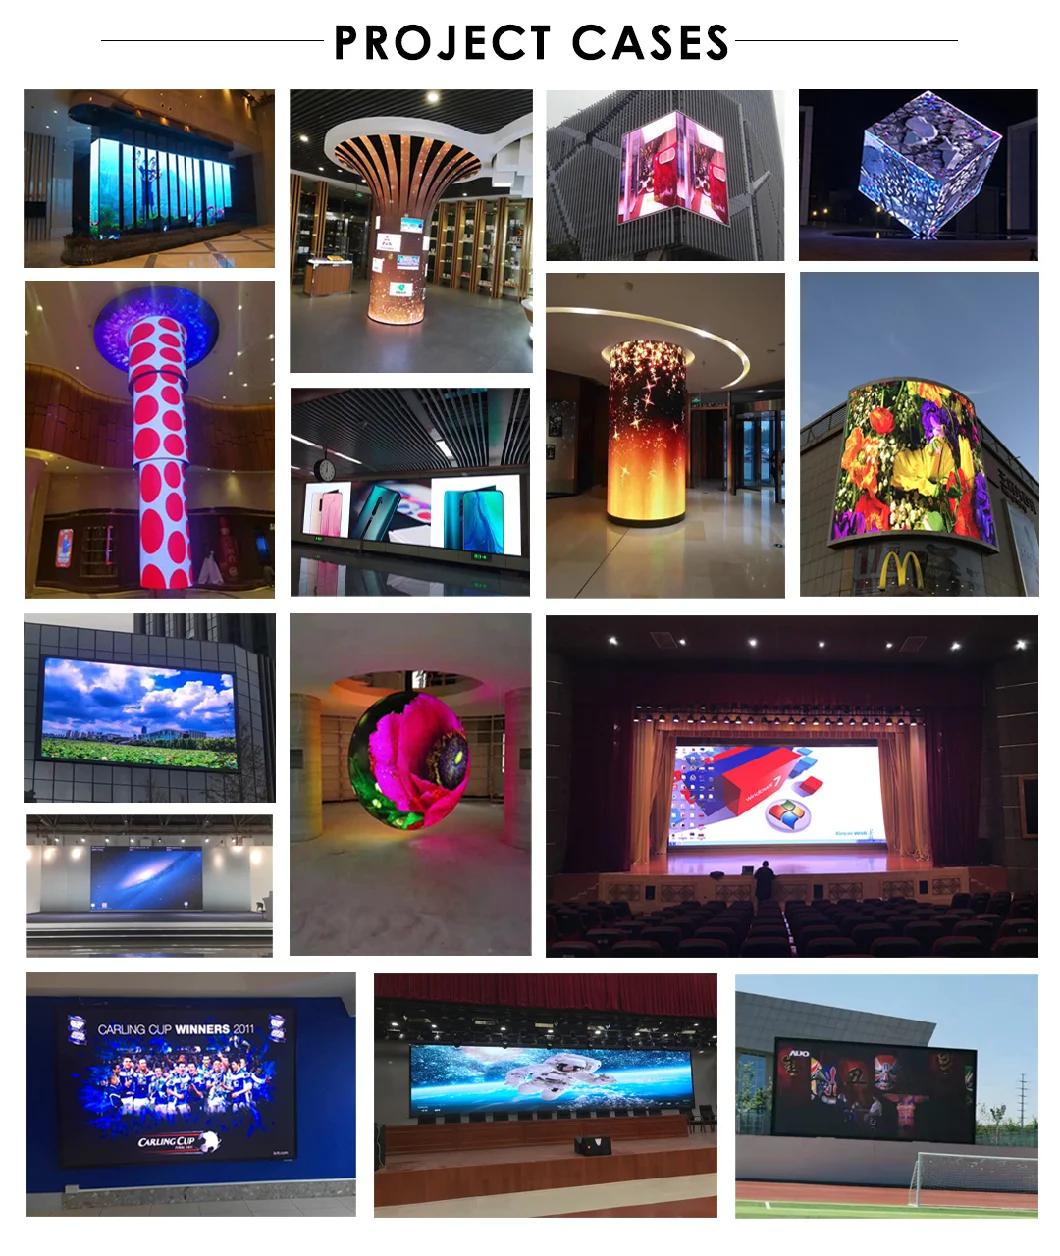 Indoor Small Pixel Pitch 2mm LED Display Full Color LED Display Screen P2